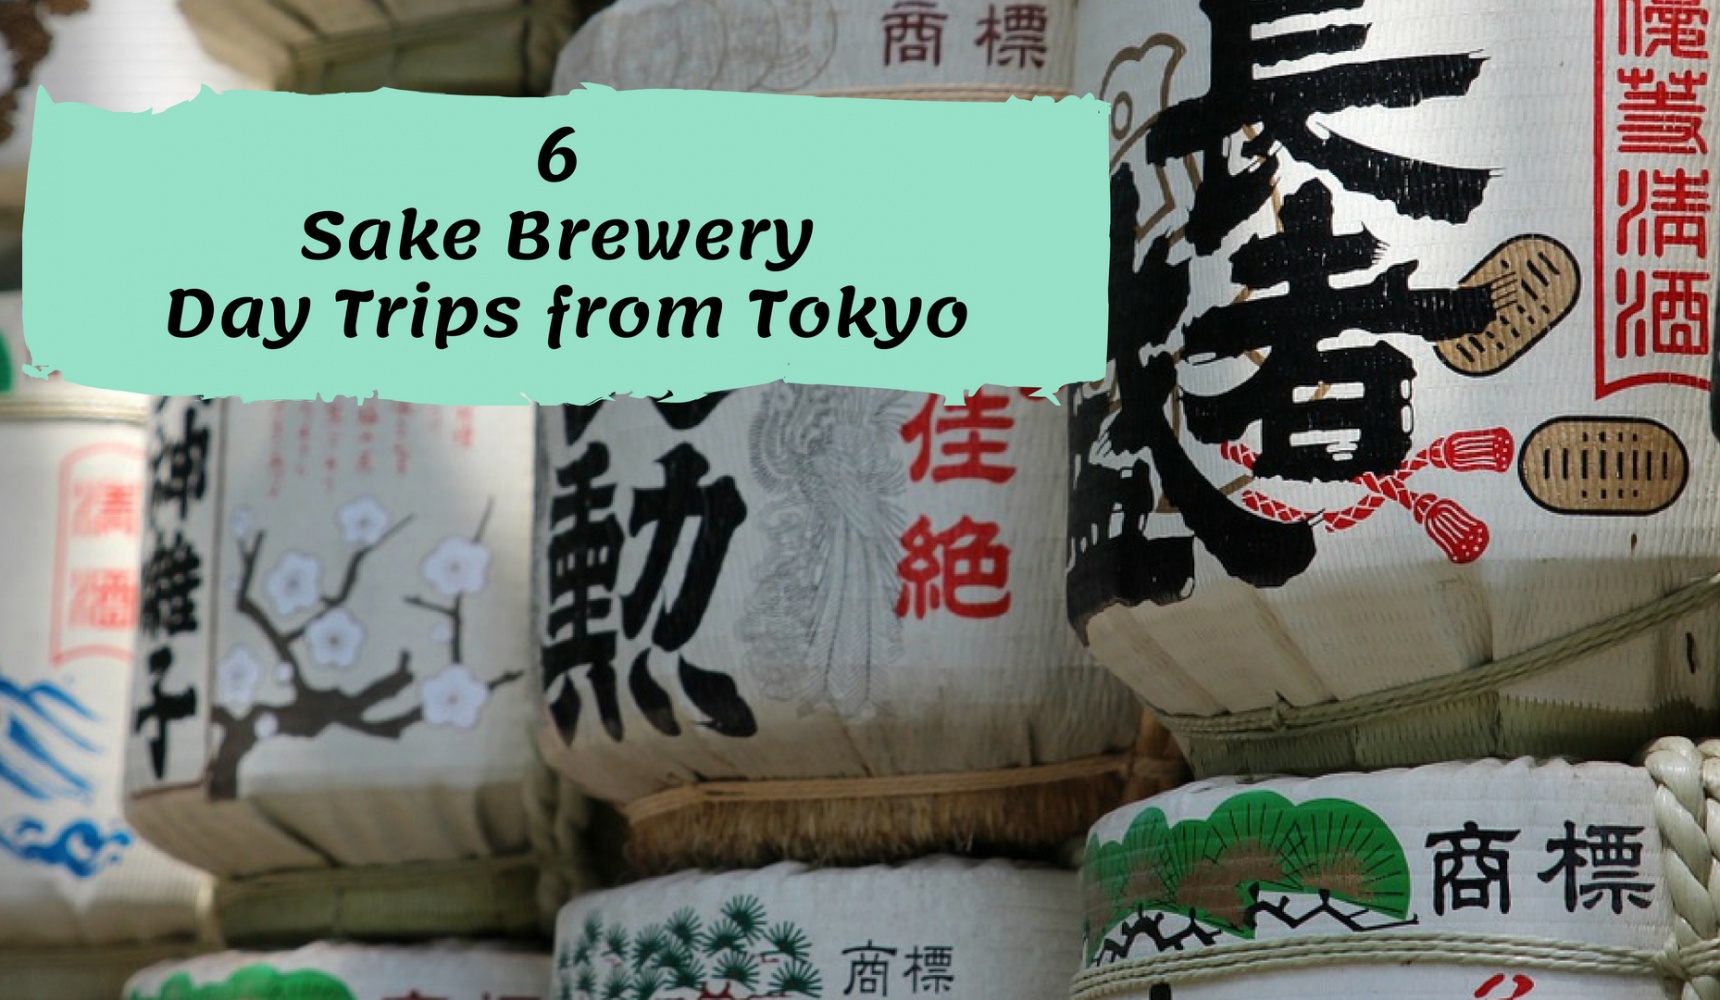 6 Sake Brewery Day Trips from Tokyo